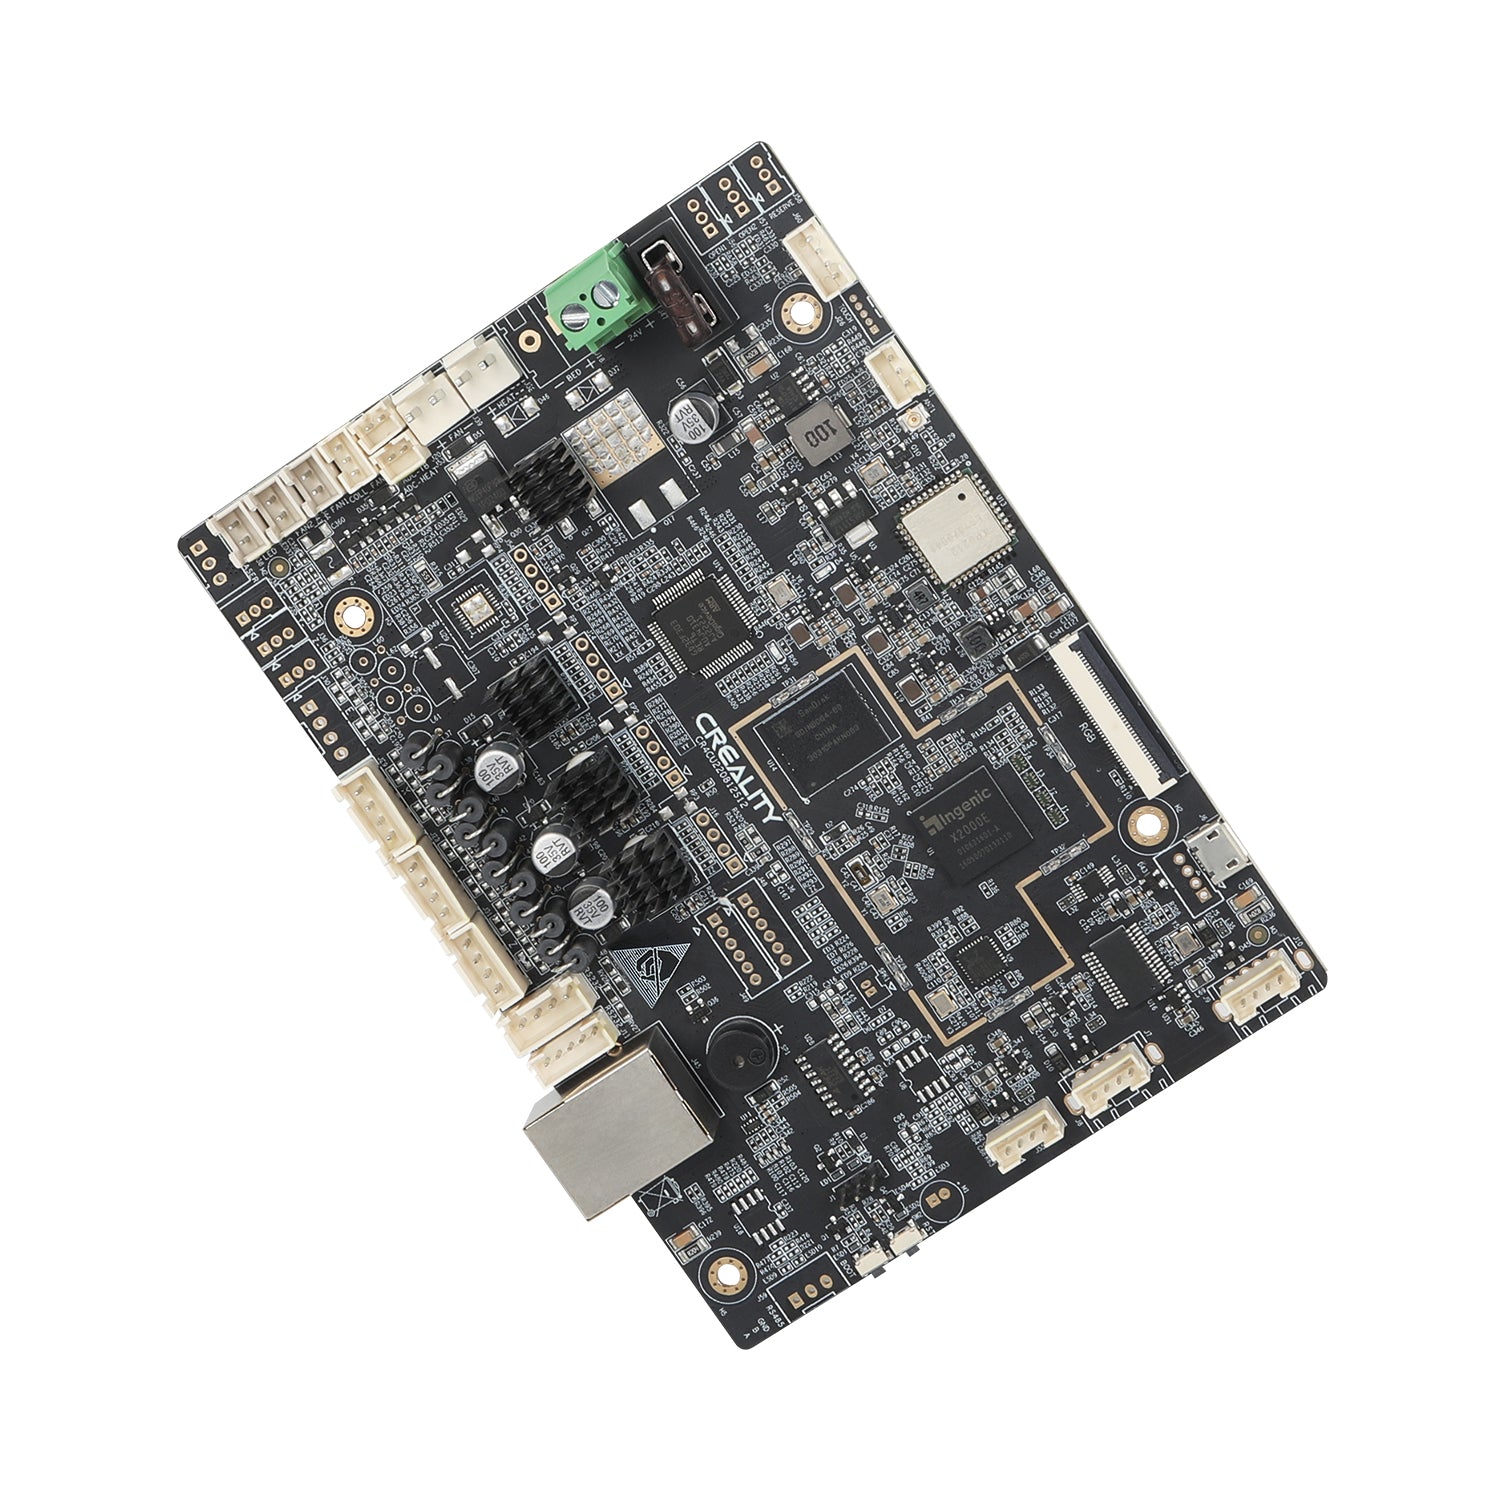 Creality K1 Max Replacement Mainboard Kit